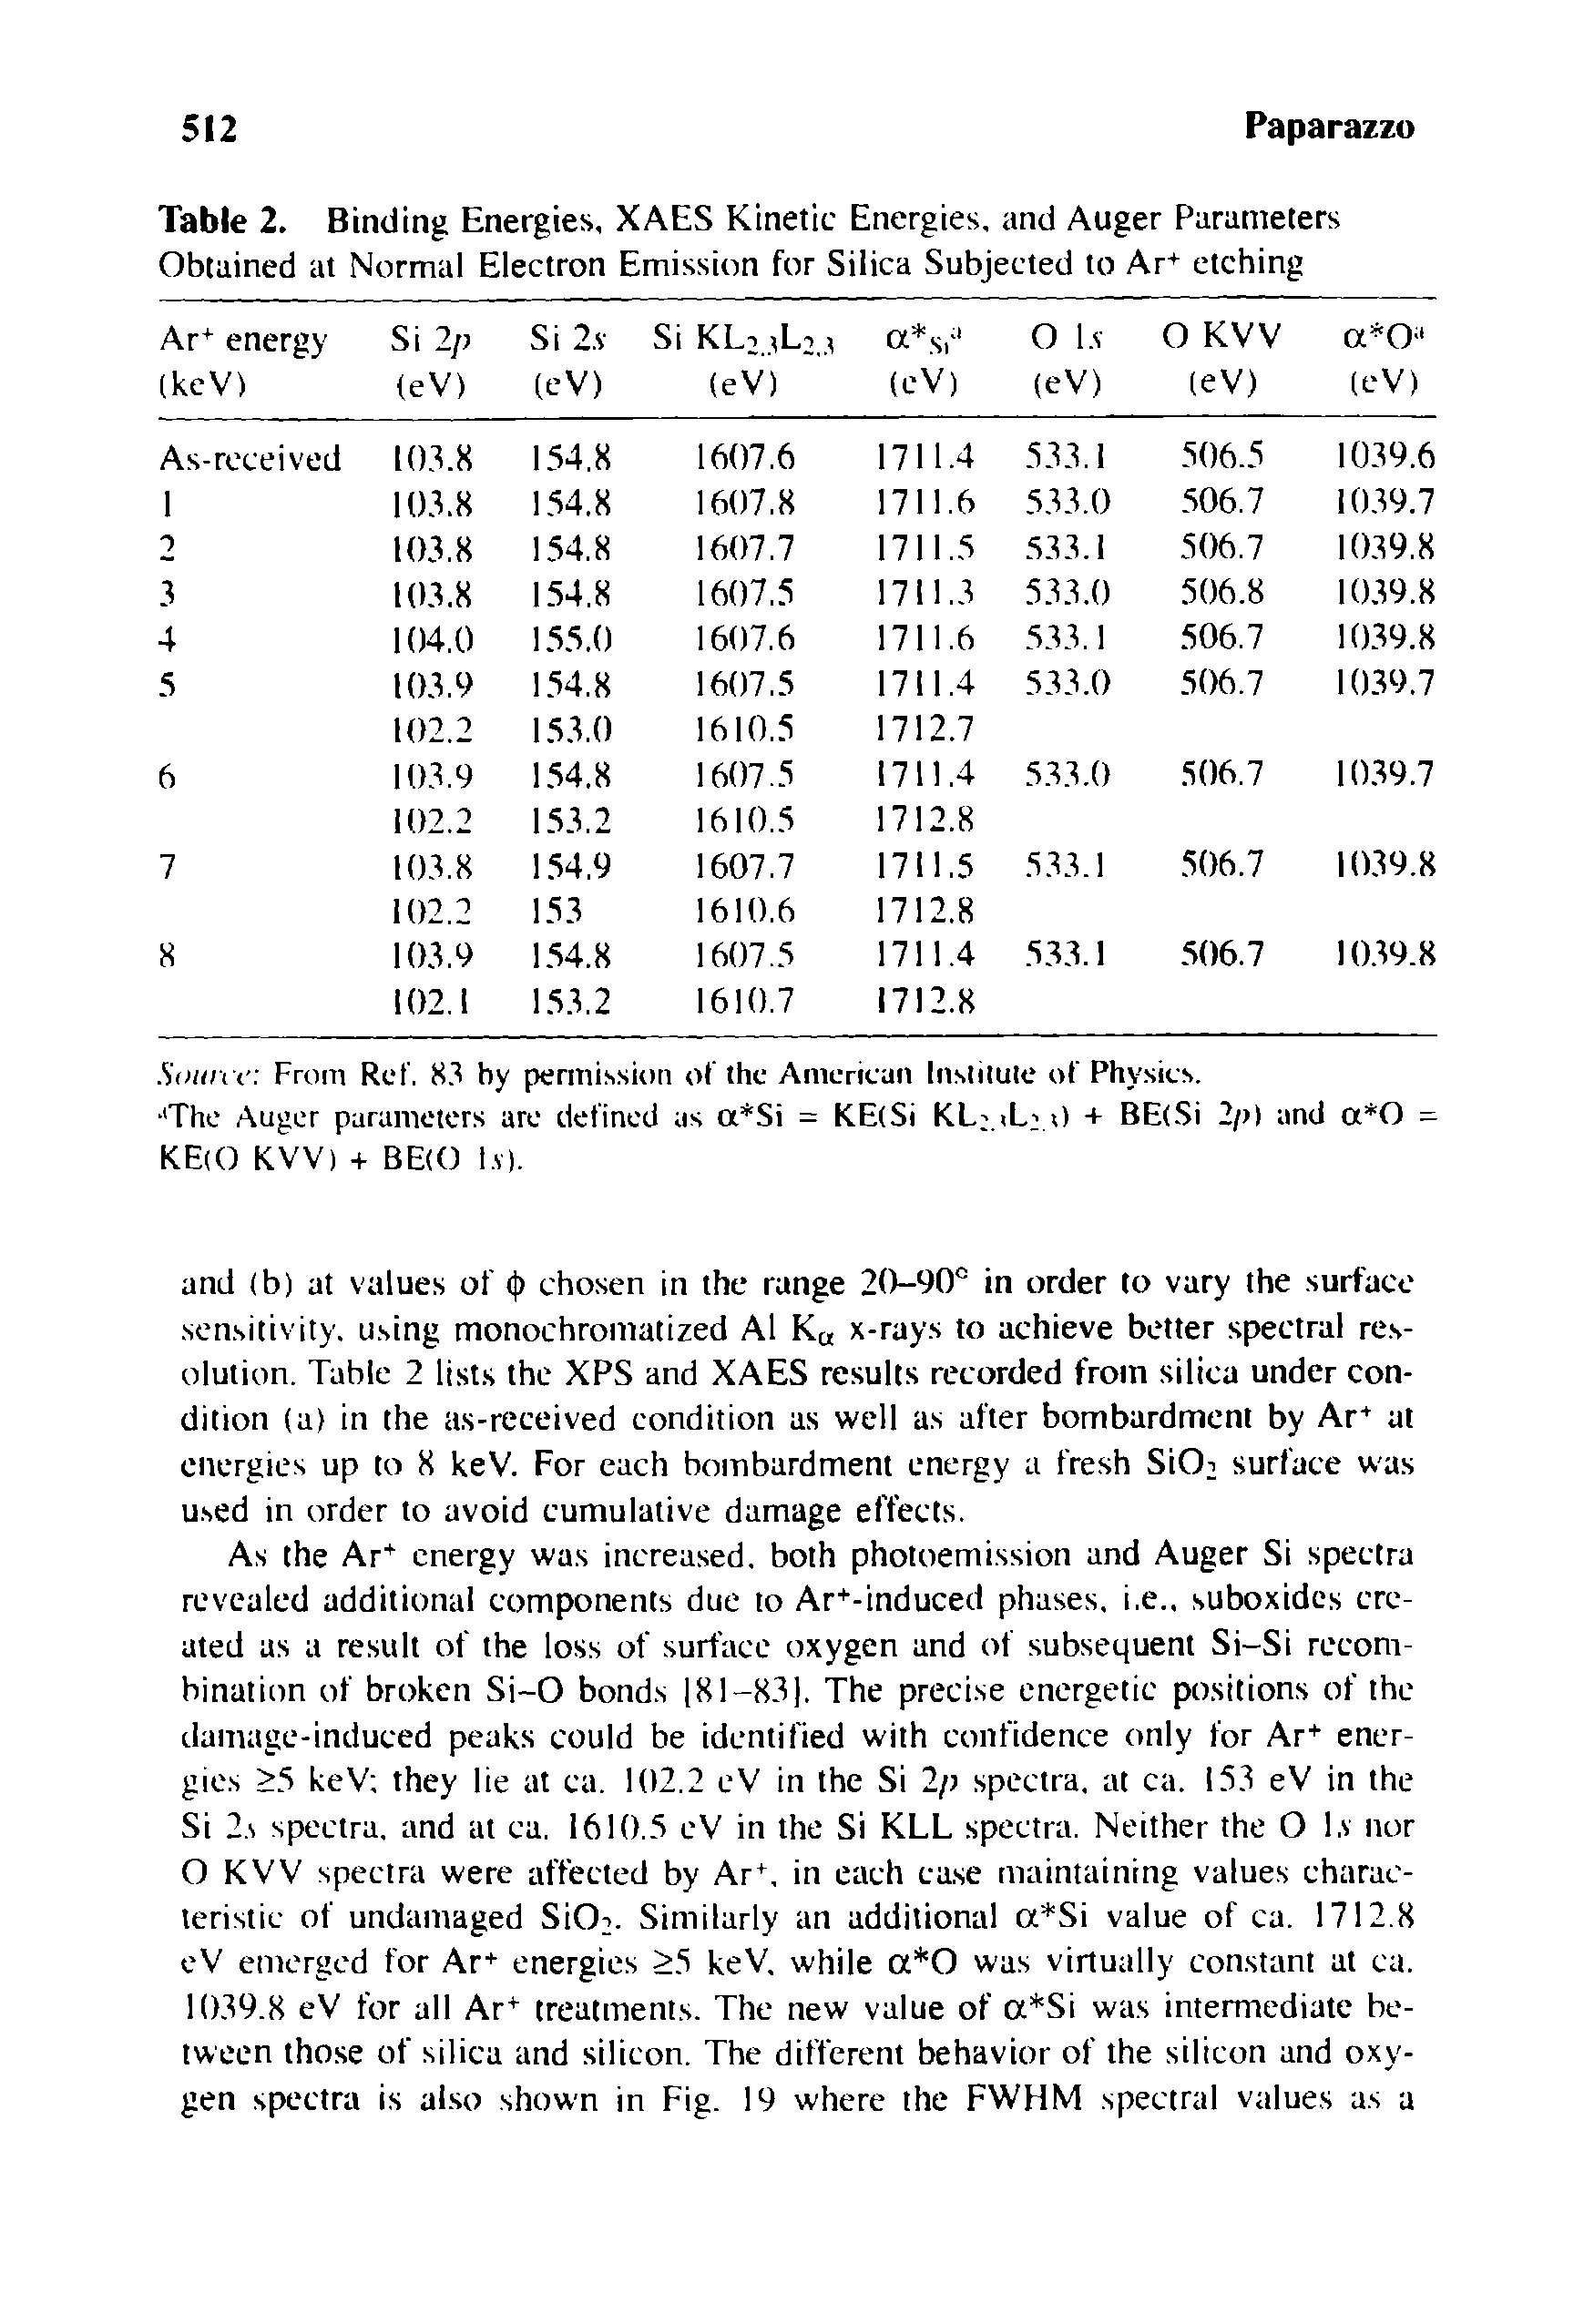 Table 2. Binding Energies, XAES Kinetic Energies, and Auger Parameters Obtained at Normal Electron Emission for Silica Subjected to Ar+ etching...